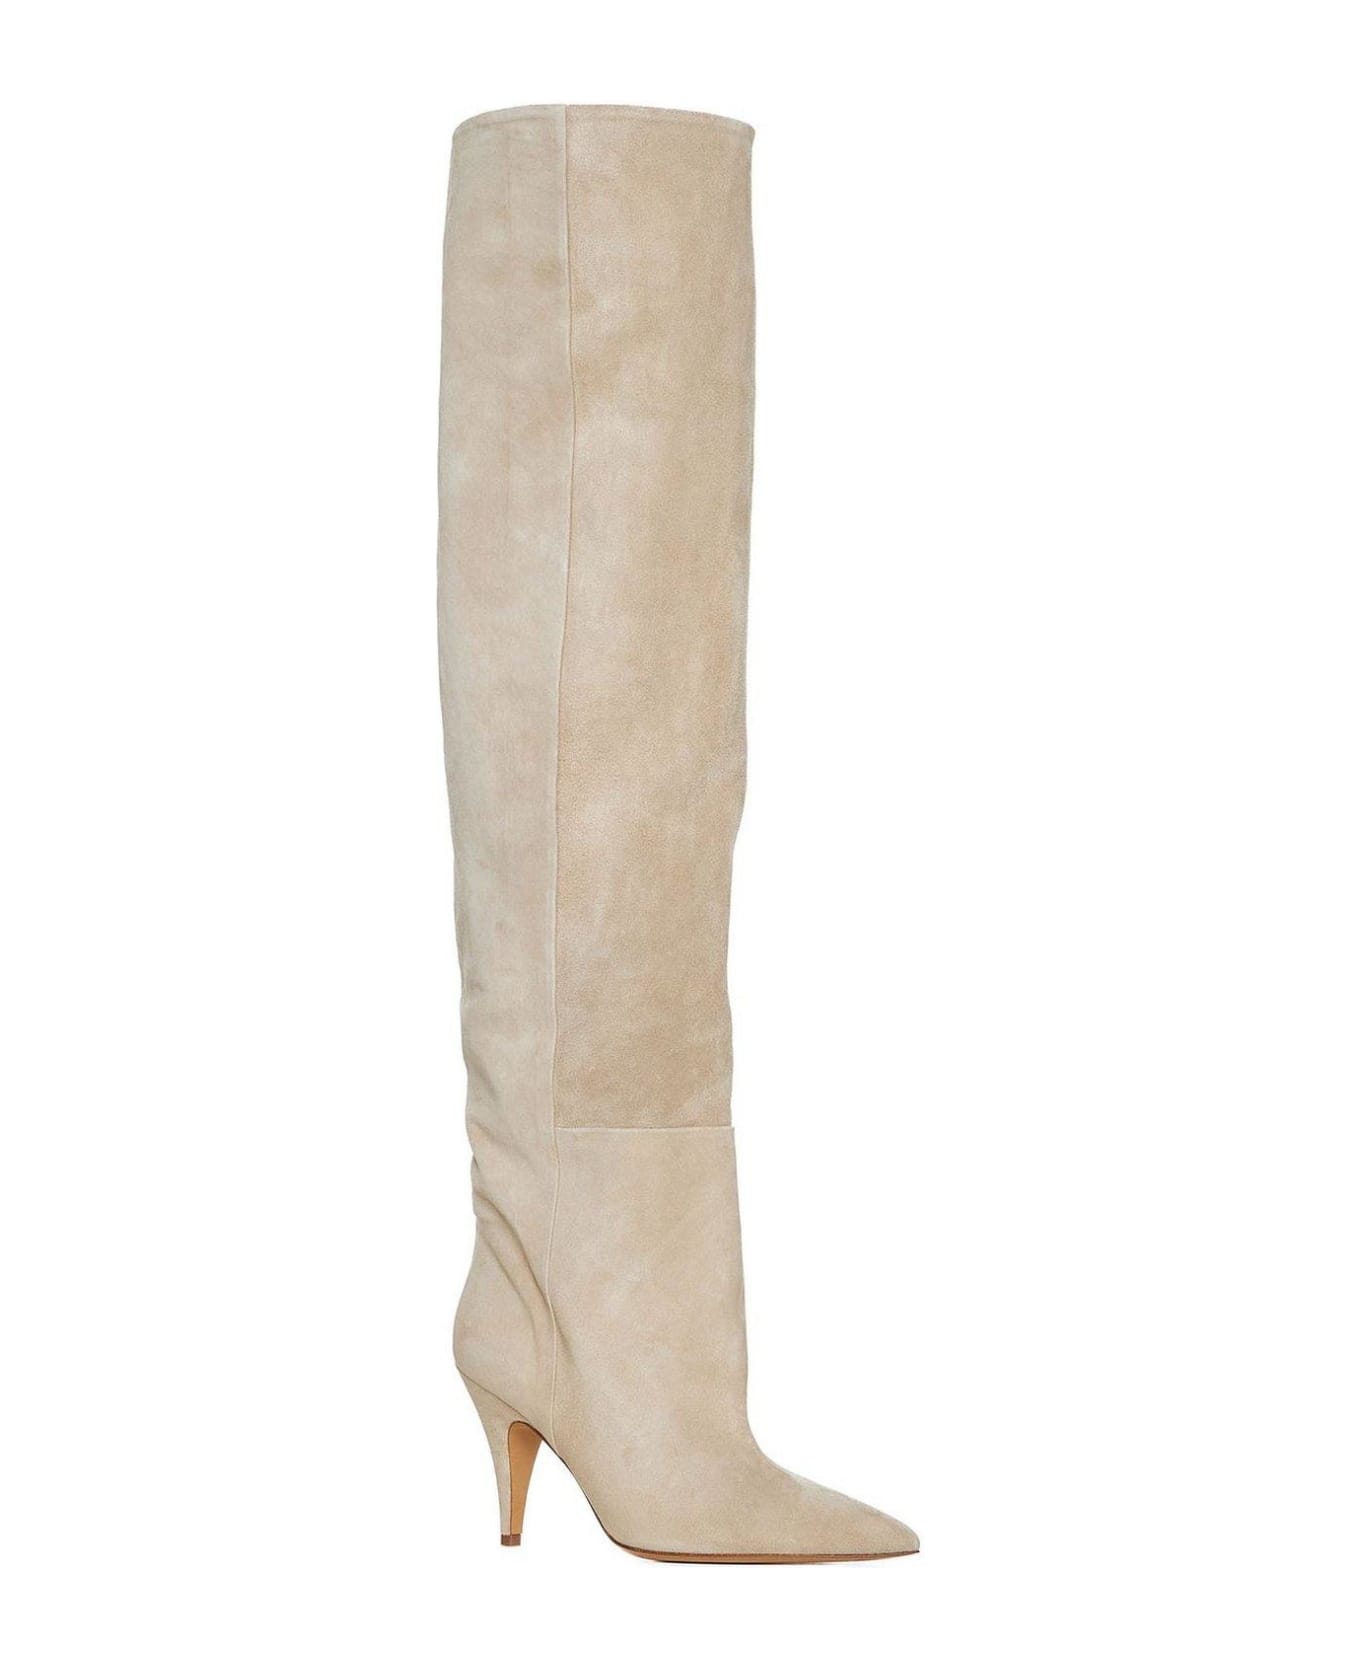 Khaite The River Pointed-toe Knee-high Boots - NUDE